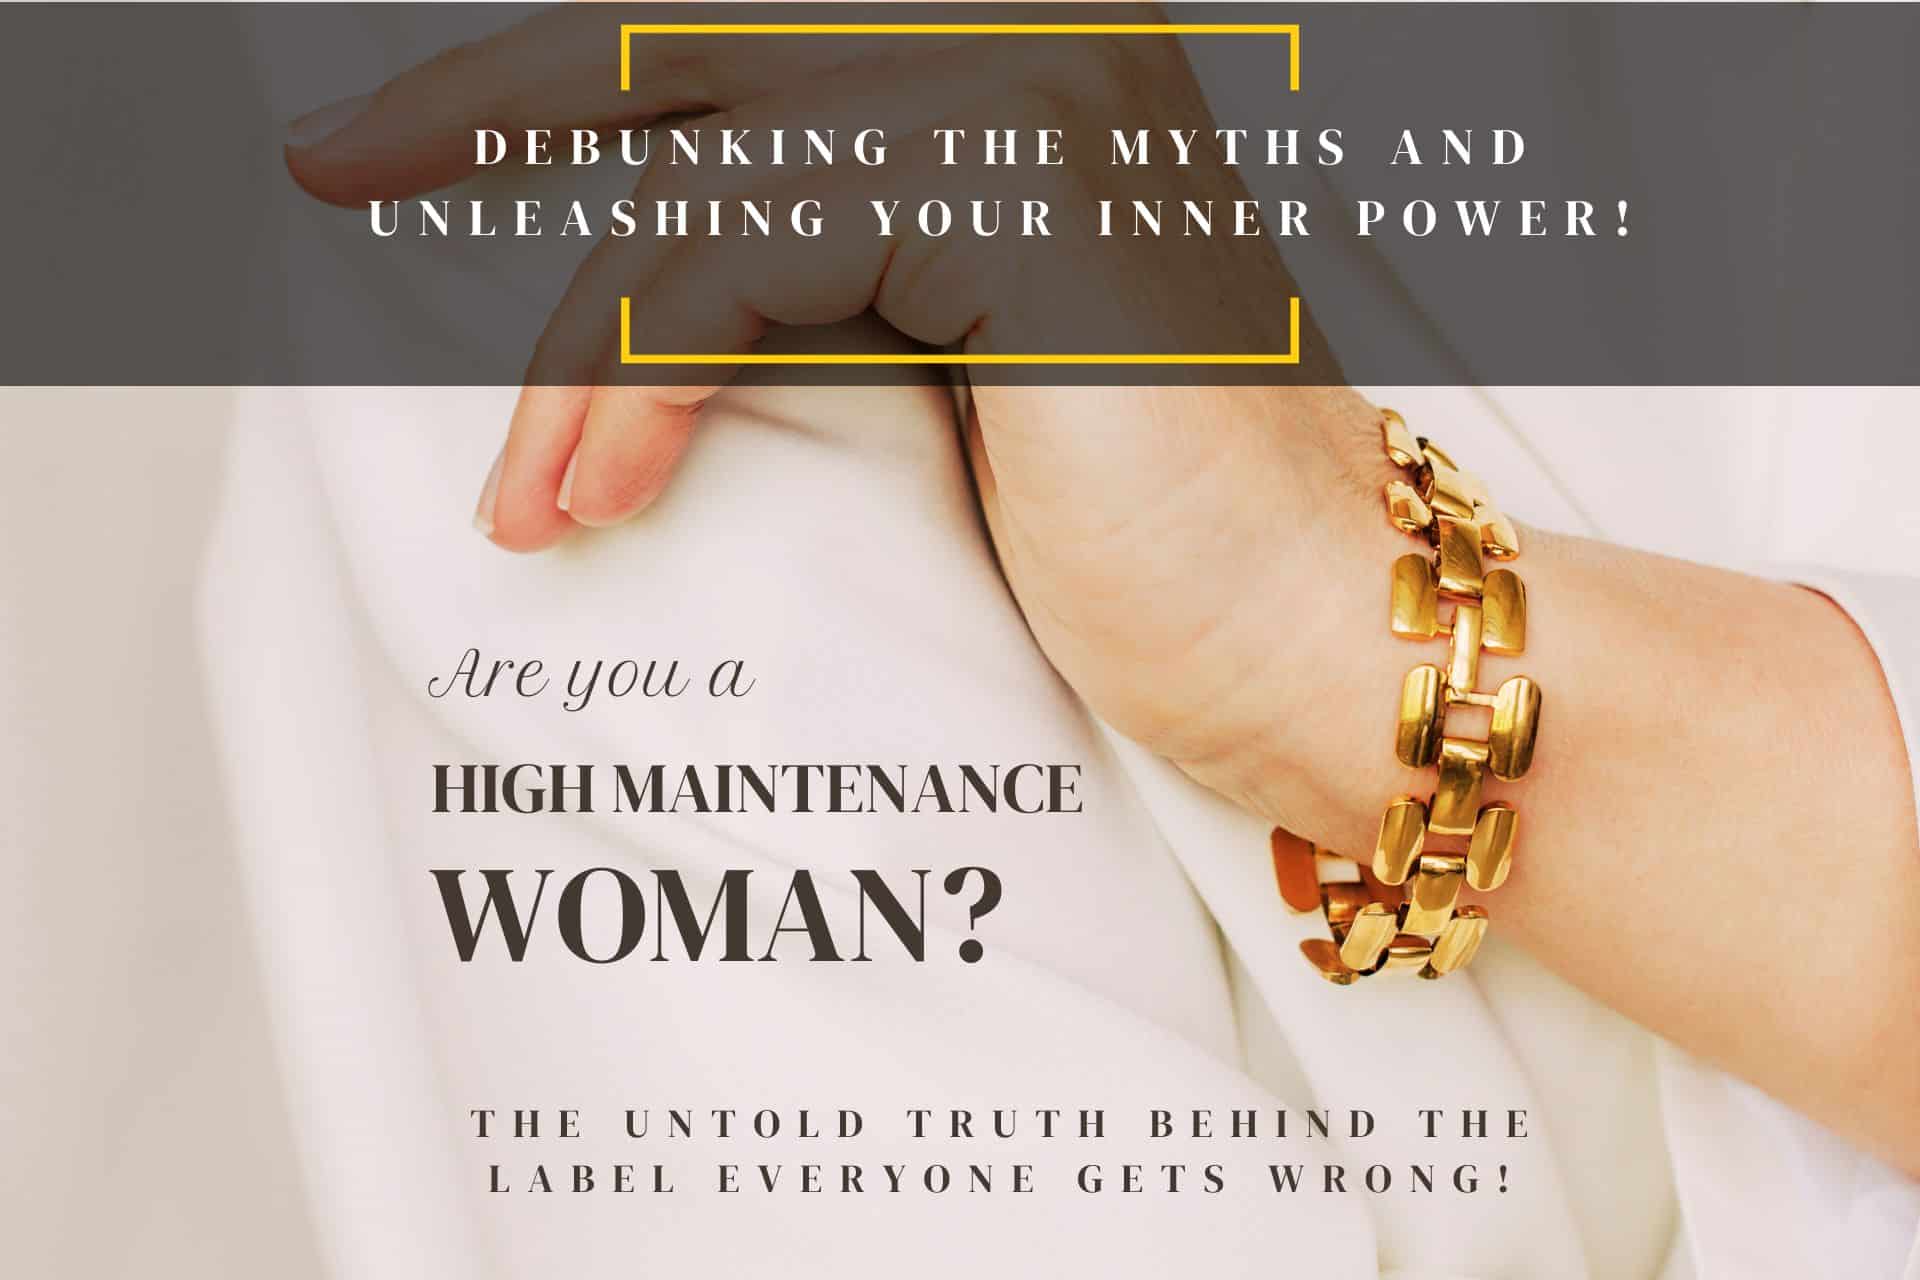 Are you a high maintenance woman